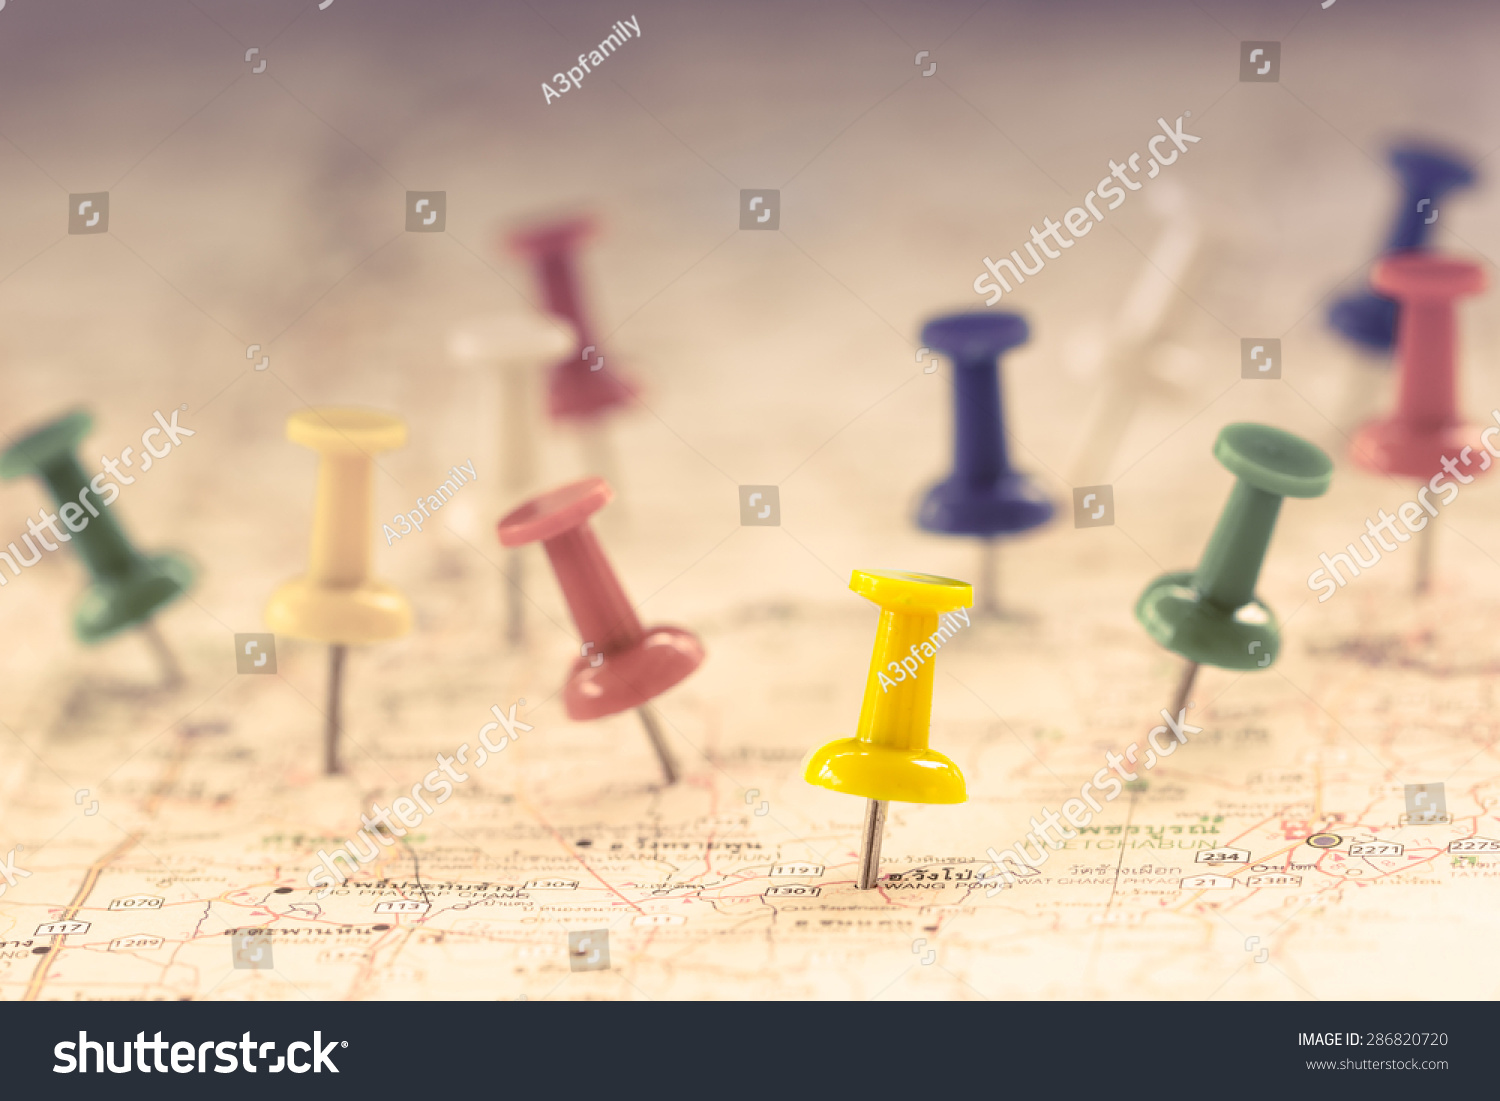 Travel concept with several pushpins on map,color filter effect #286820720